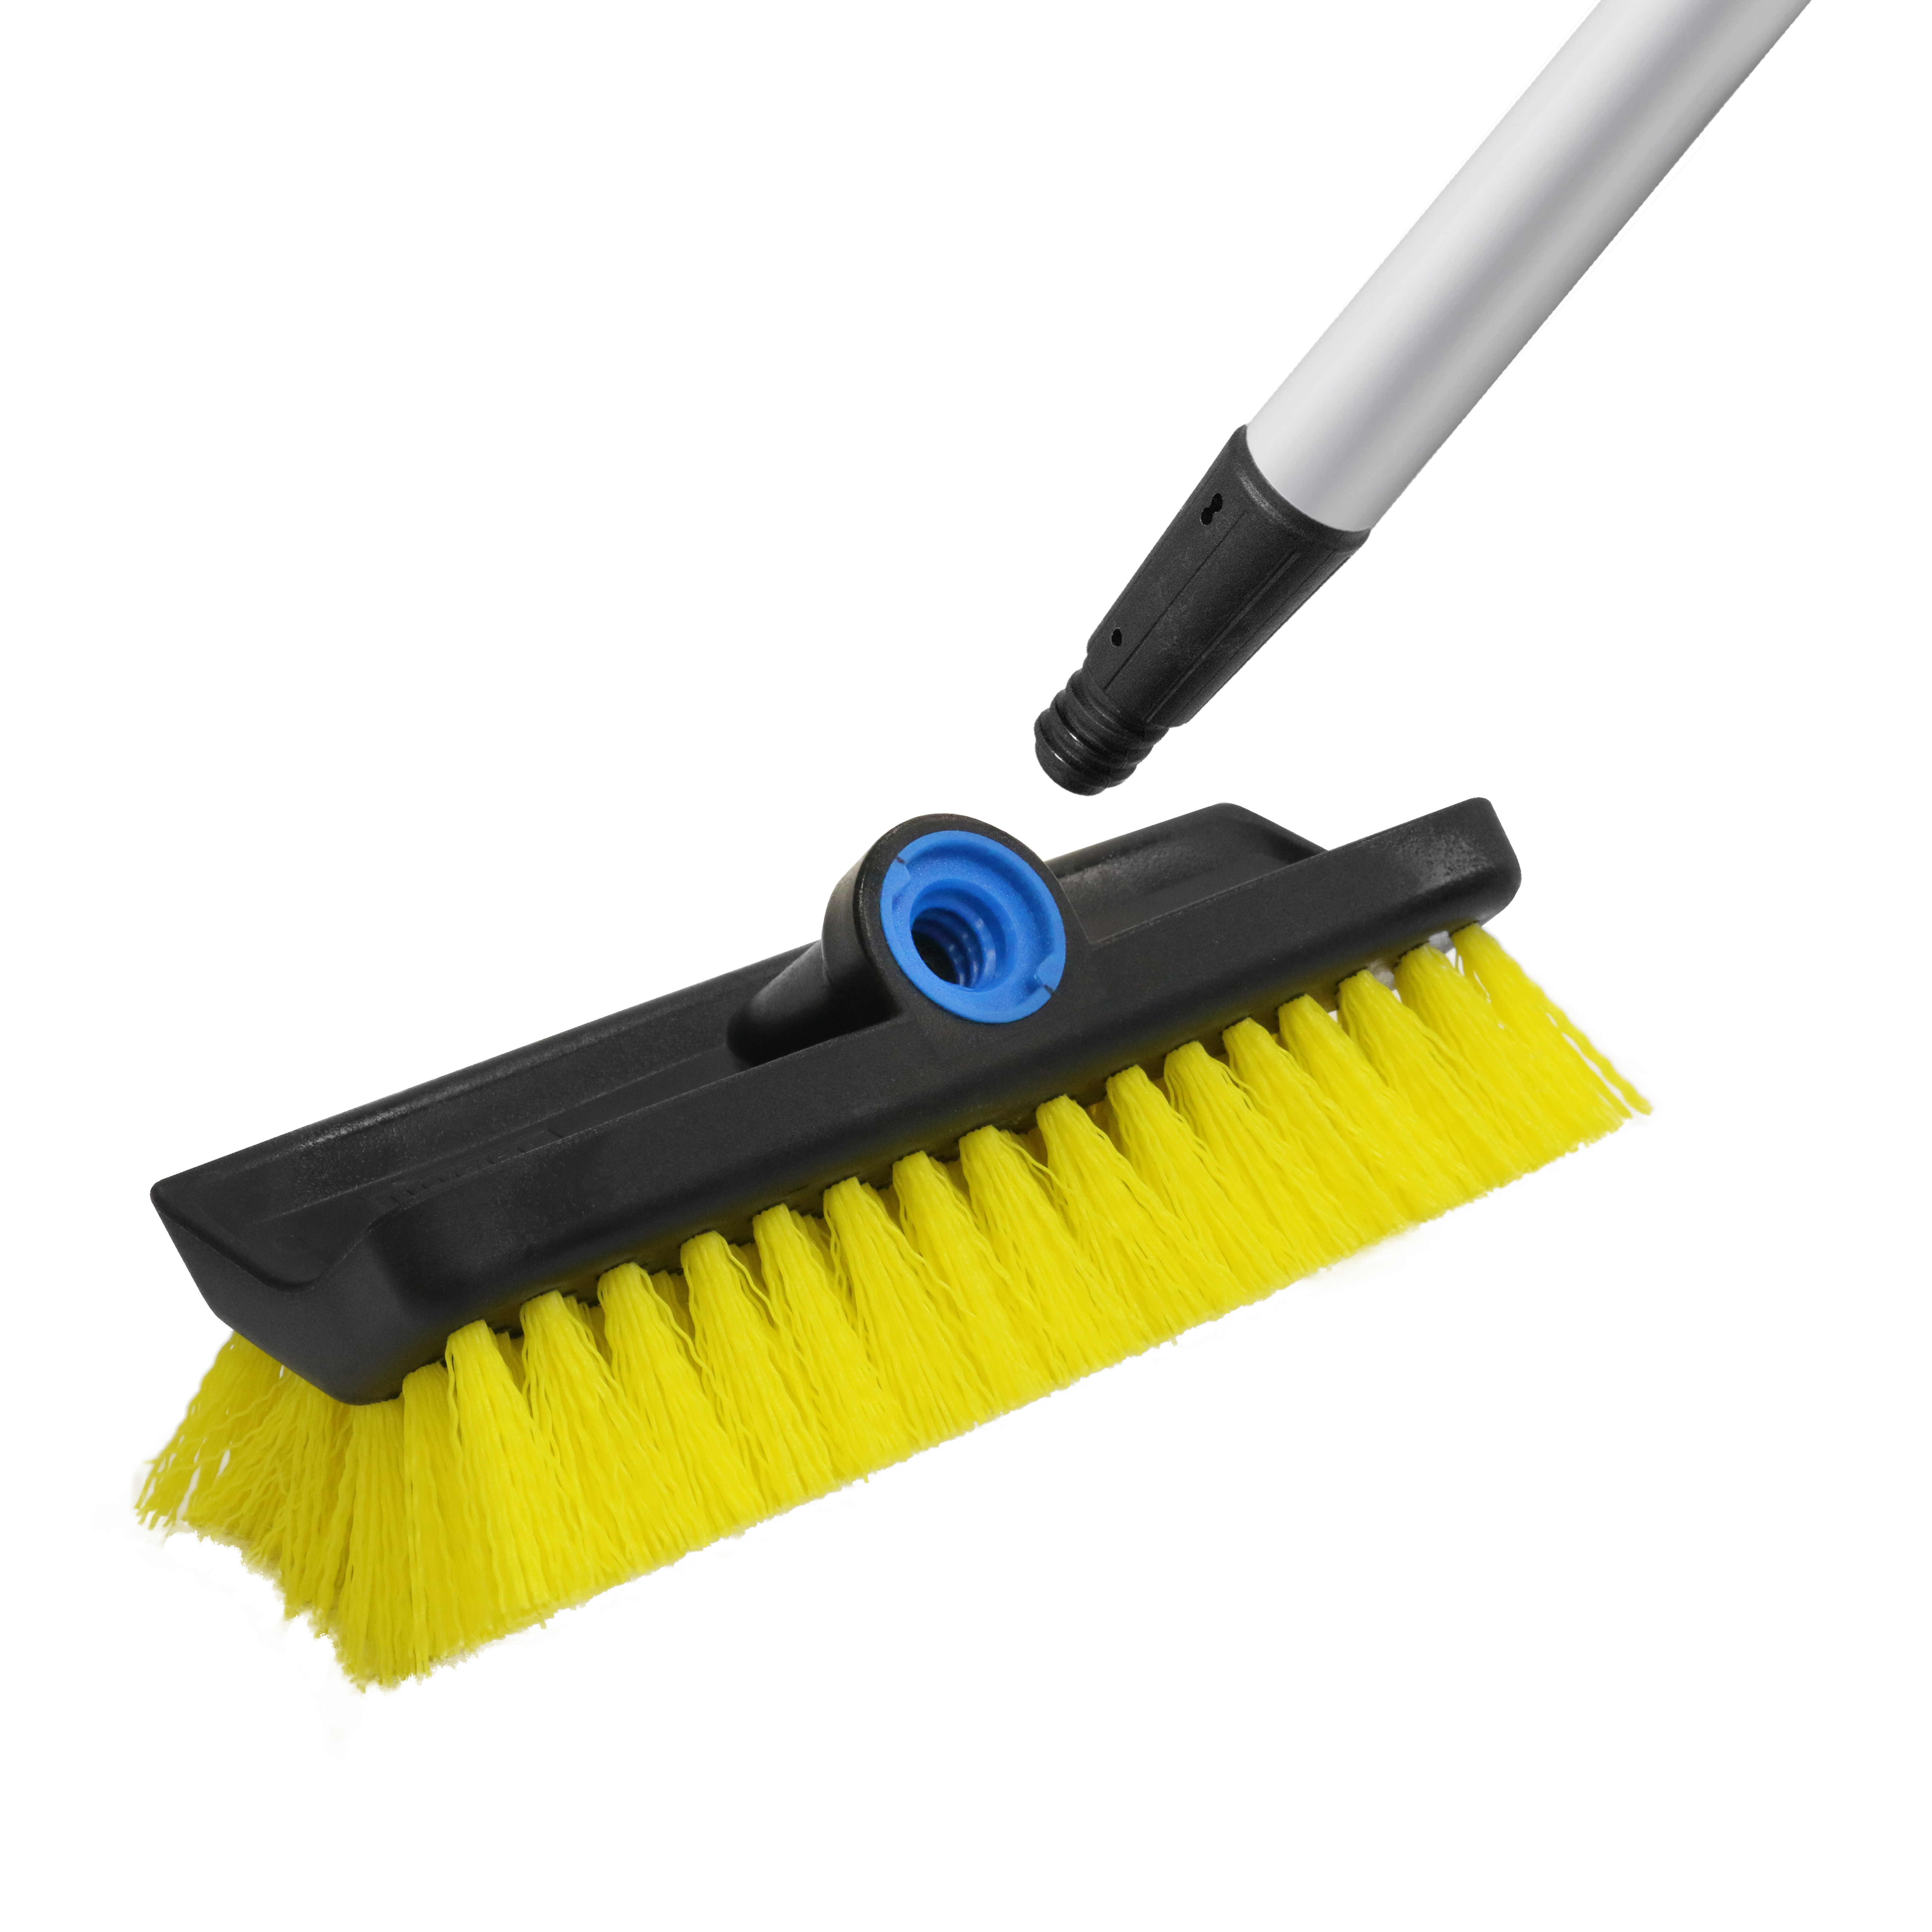 Unger Professional 976820 Scrub Brush, 1-3/4 in L Trim, Synthetic - 3